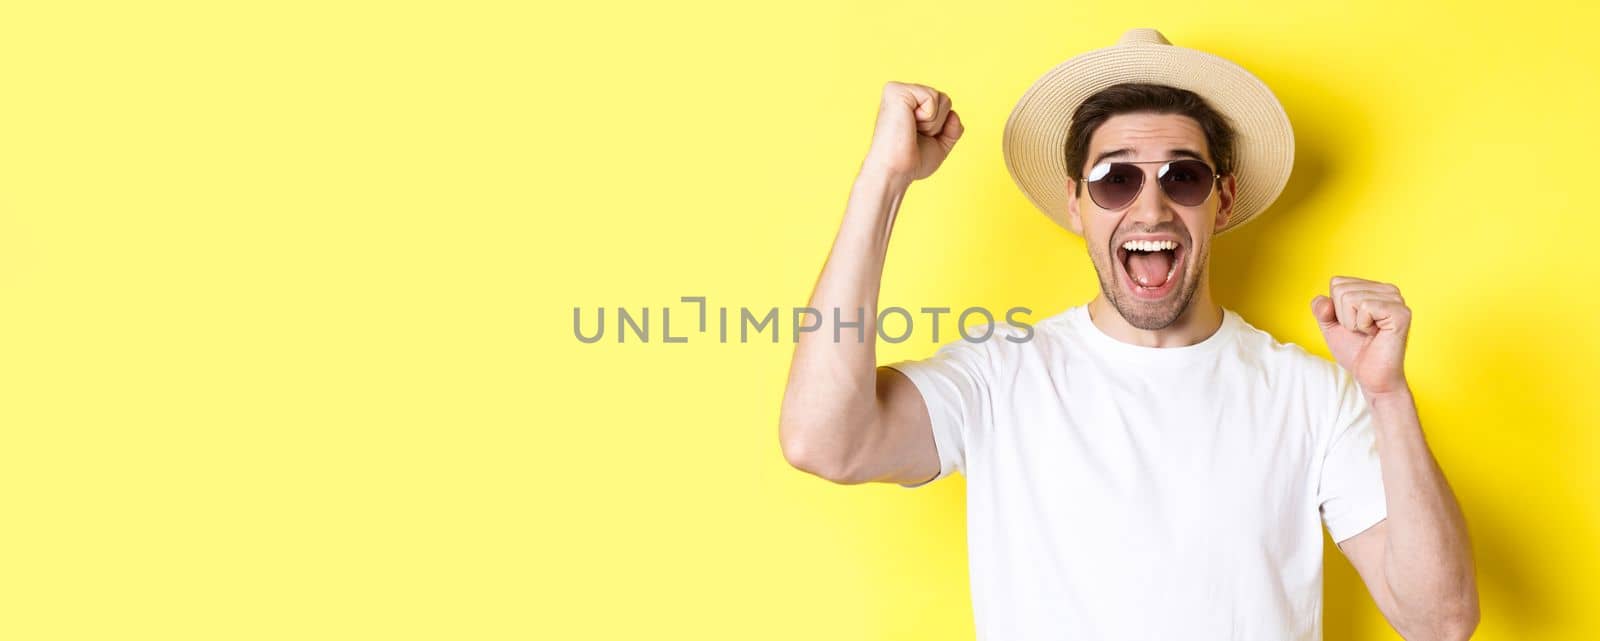 Concept of tourism and holidays. Happy male tourist celebrating his vacation, raising hands up and shouting for joy, wearing sunglasses with straw hat.